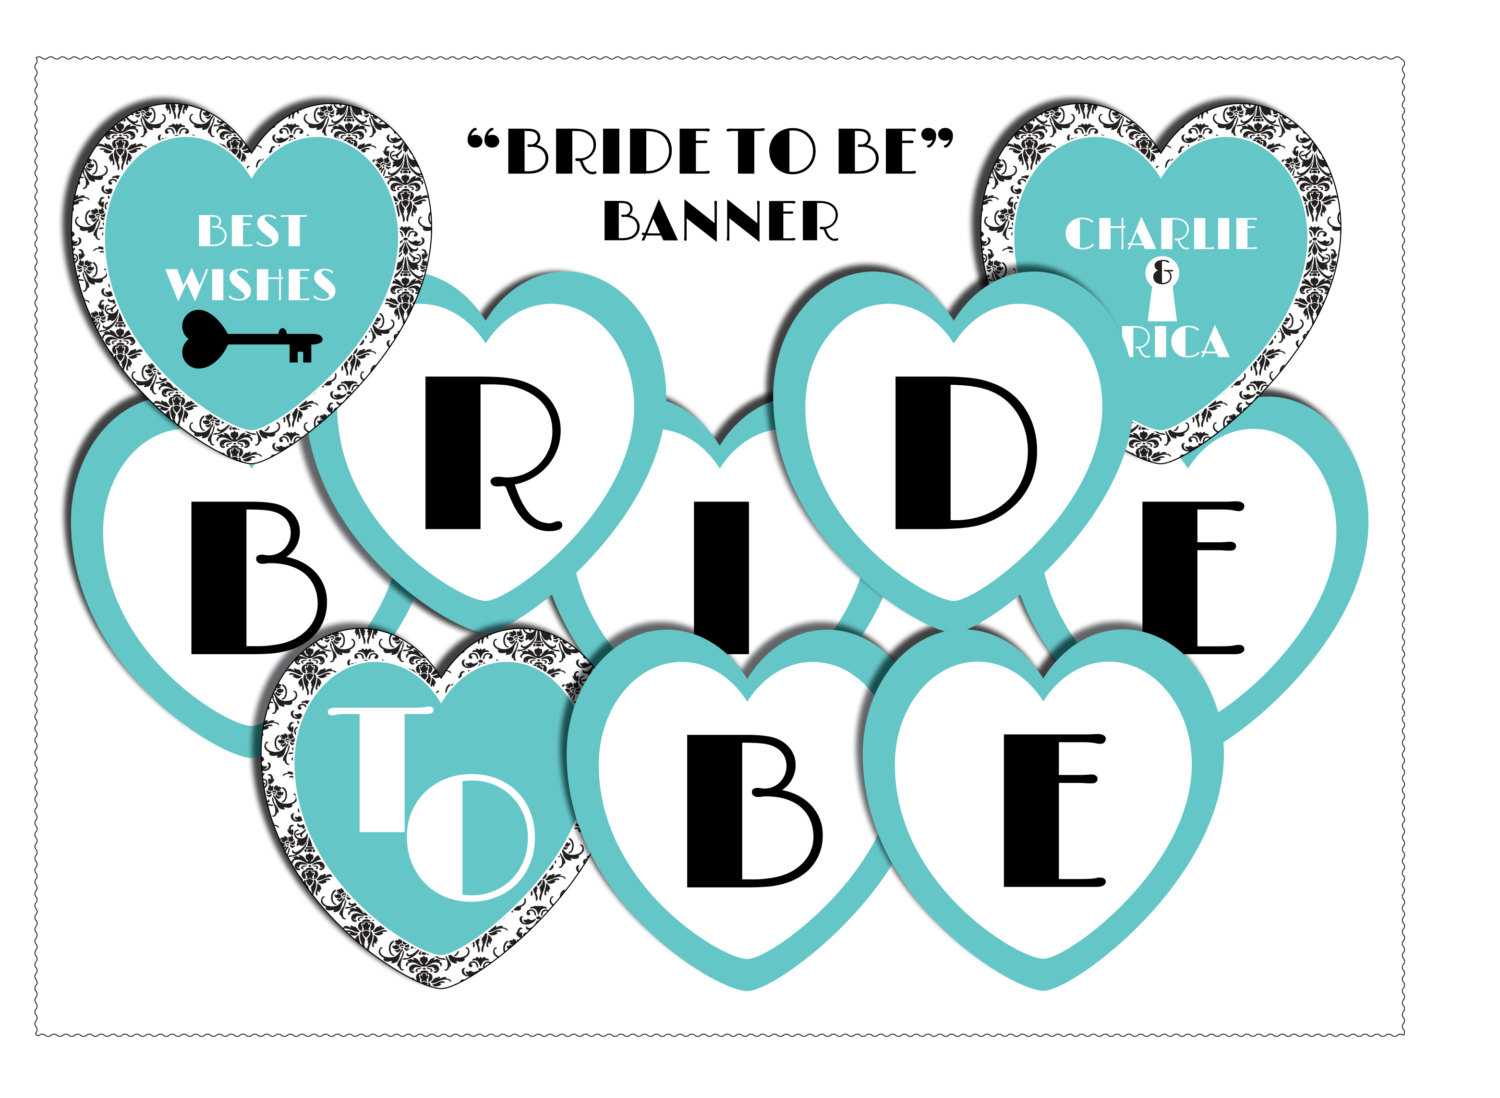 11 Best Photos Of Bride To Be Banner Template - Diy Bridal For Bridal Shower Banner Template